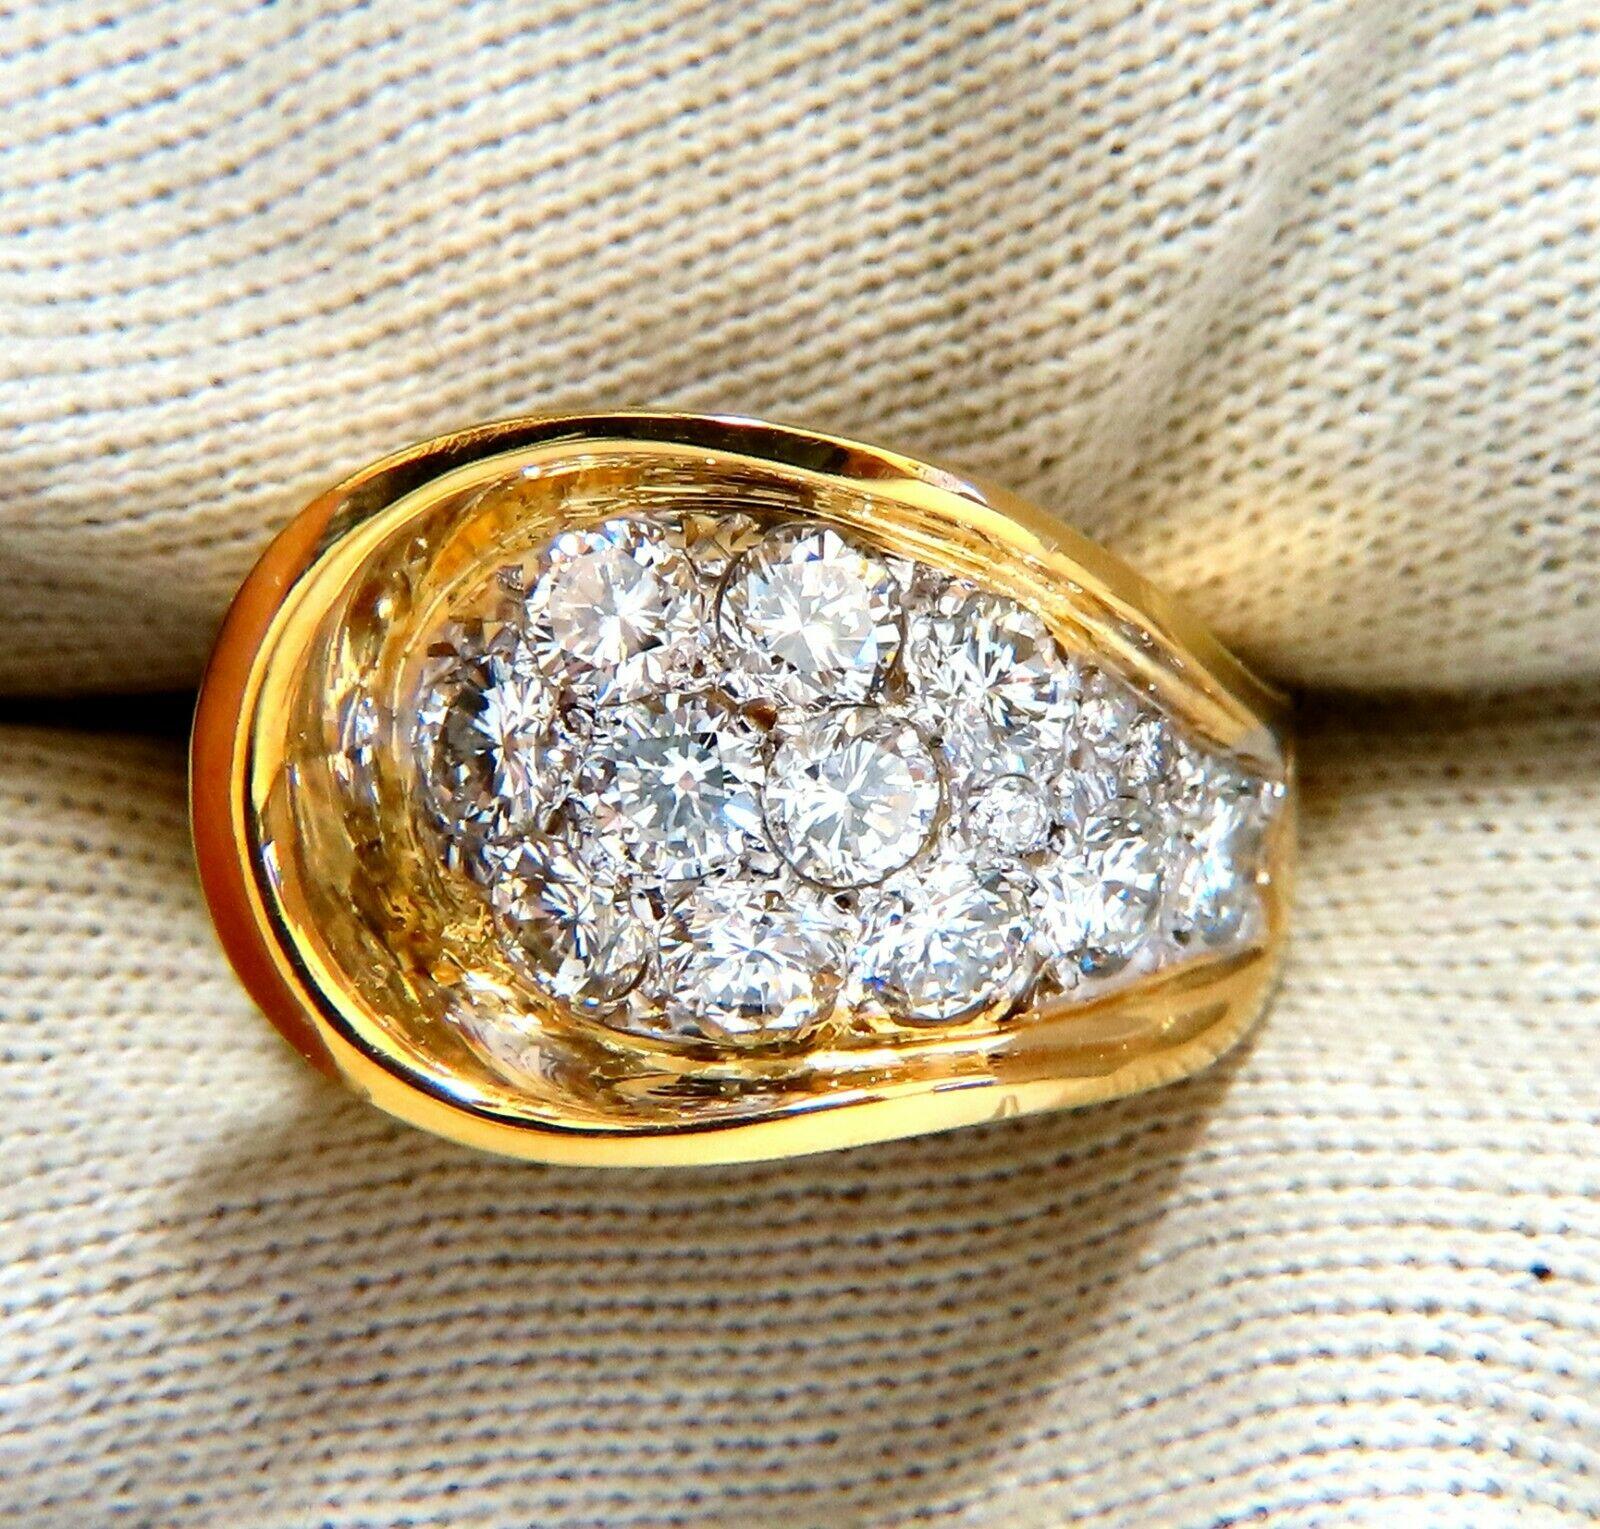 Bow Curl Pave Cluster

2.60ct  Natural Round Cut Diamonds. 

14kt yellow gold

13.6 Grams

Overall ring: 15.1mm wide

Depth: 7.3mm

Current ring size: 6

May professionally resize, please inquire.

$9500 Appraisal Certificate To Accompany